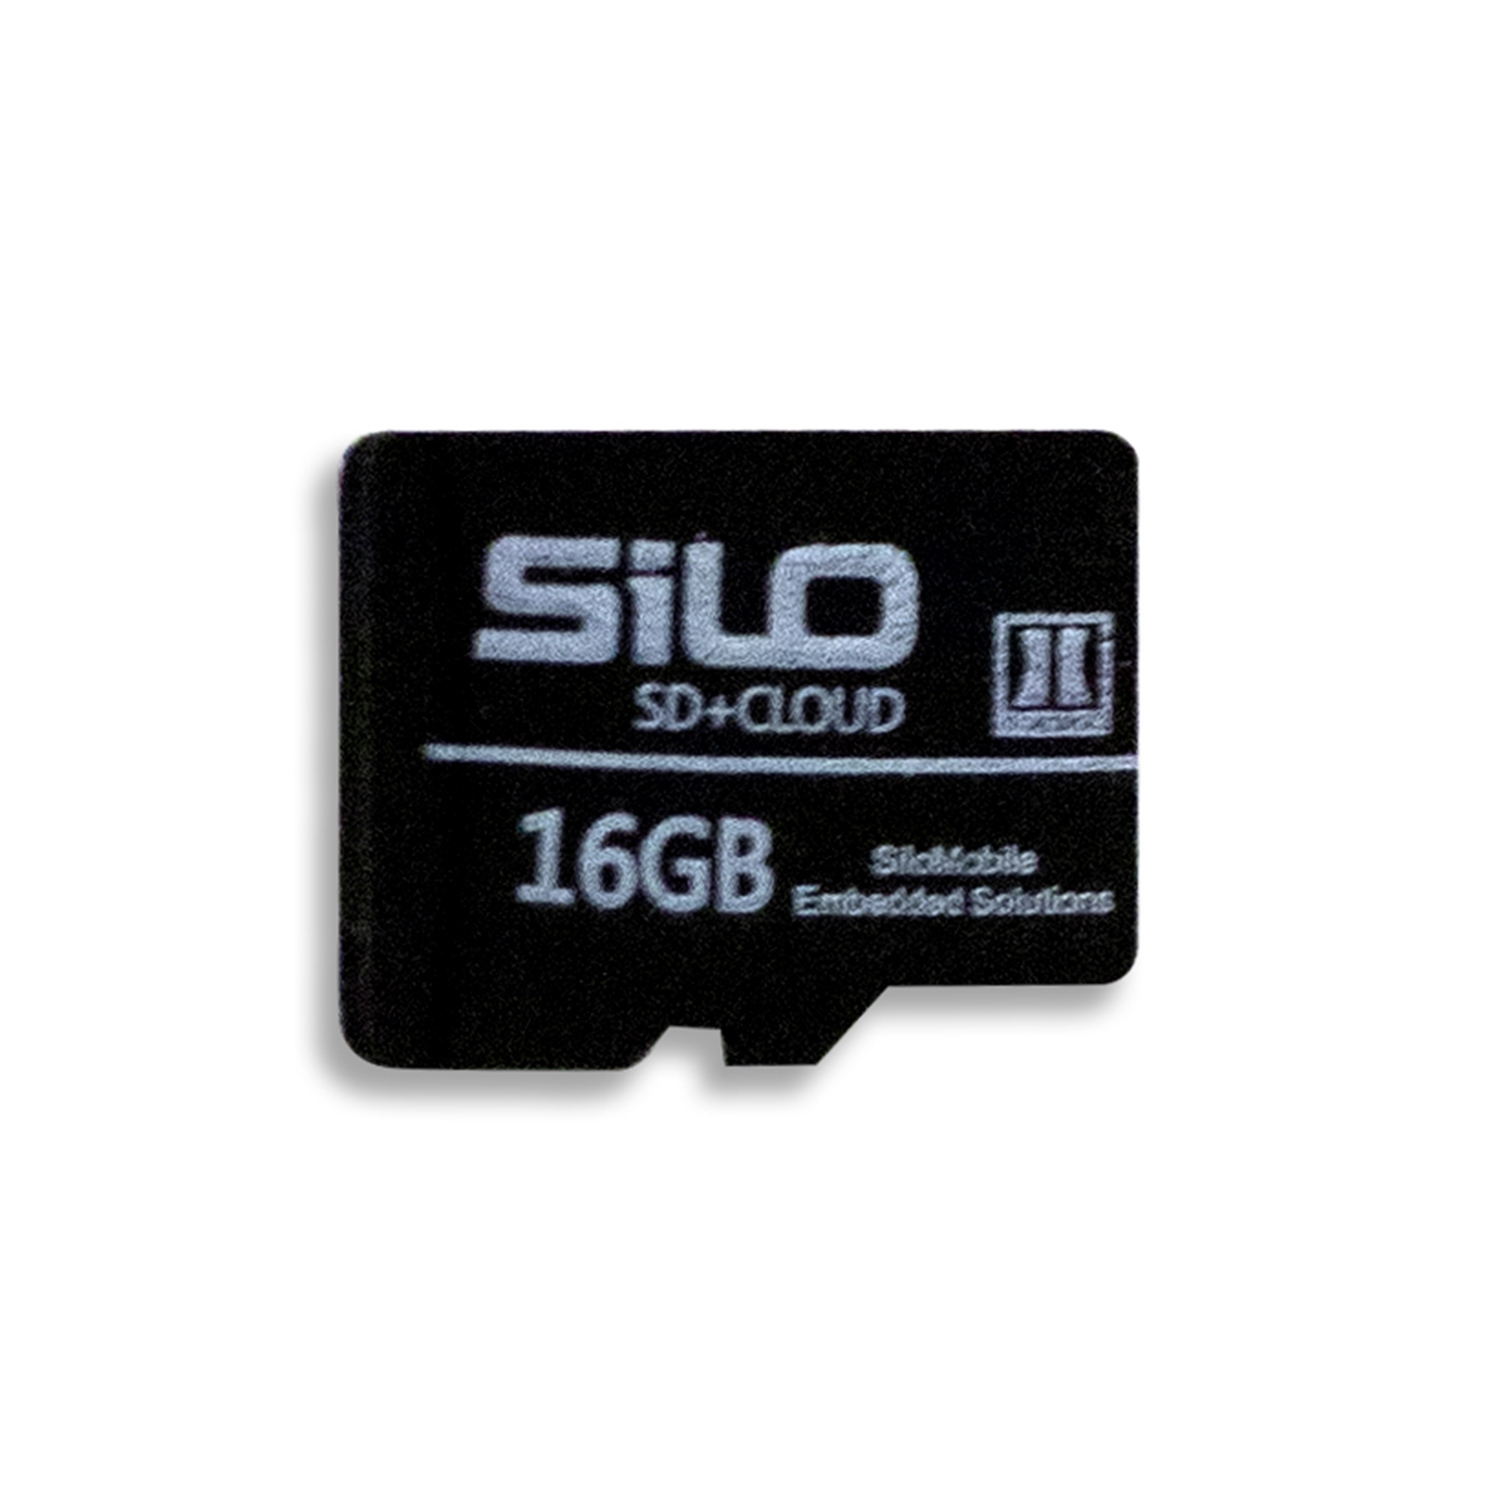 Silo Cloud 16GB SD Card - Our Silo Cloud Sd Cards Are Designed To Extend Your Mobile Phone’s Internal Memory Capacity. Also, It Backs Up Files Through The Silo Cloud So That Your Files Are Never Lost.